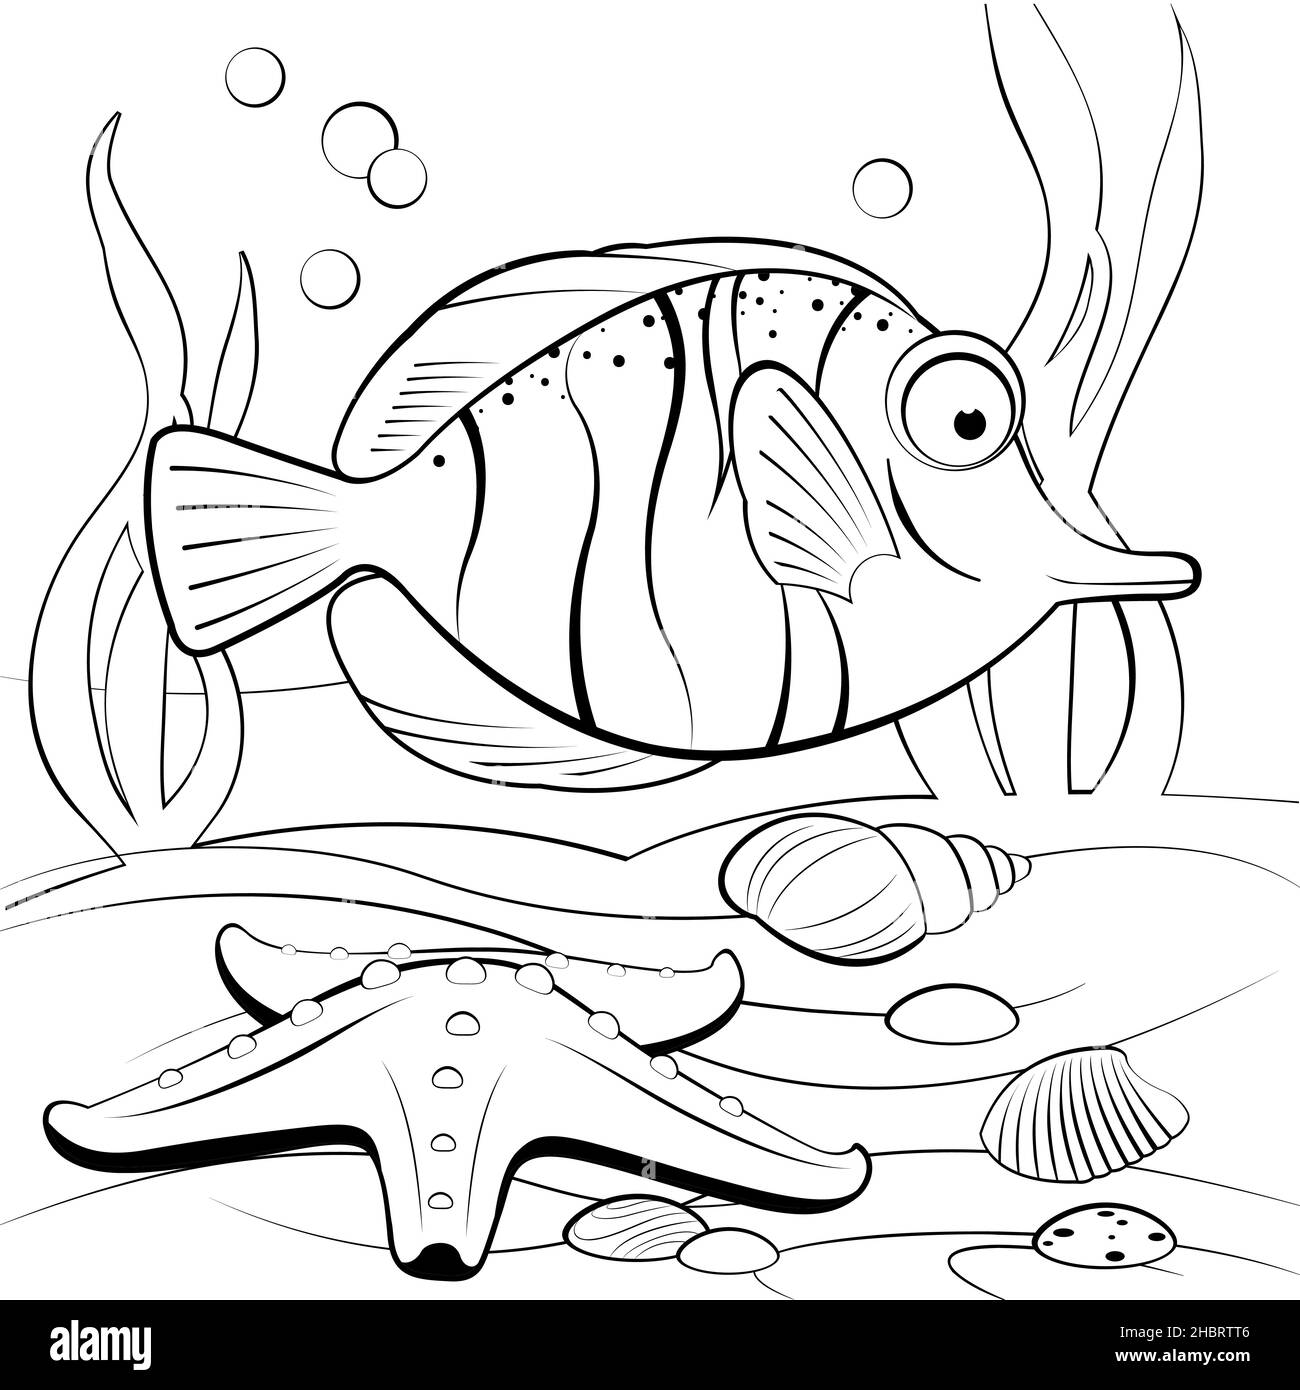 red fishy picture by scorpy for underwater scene drawing contest   Pxleyescom